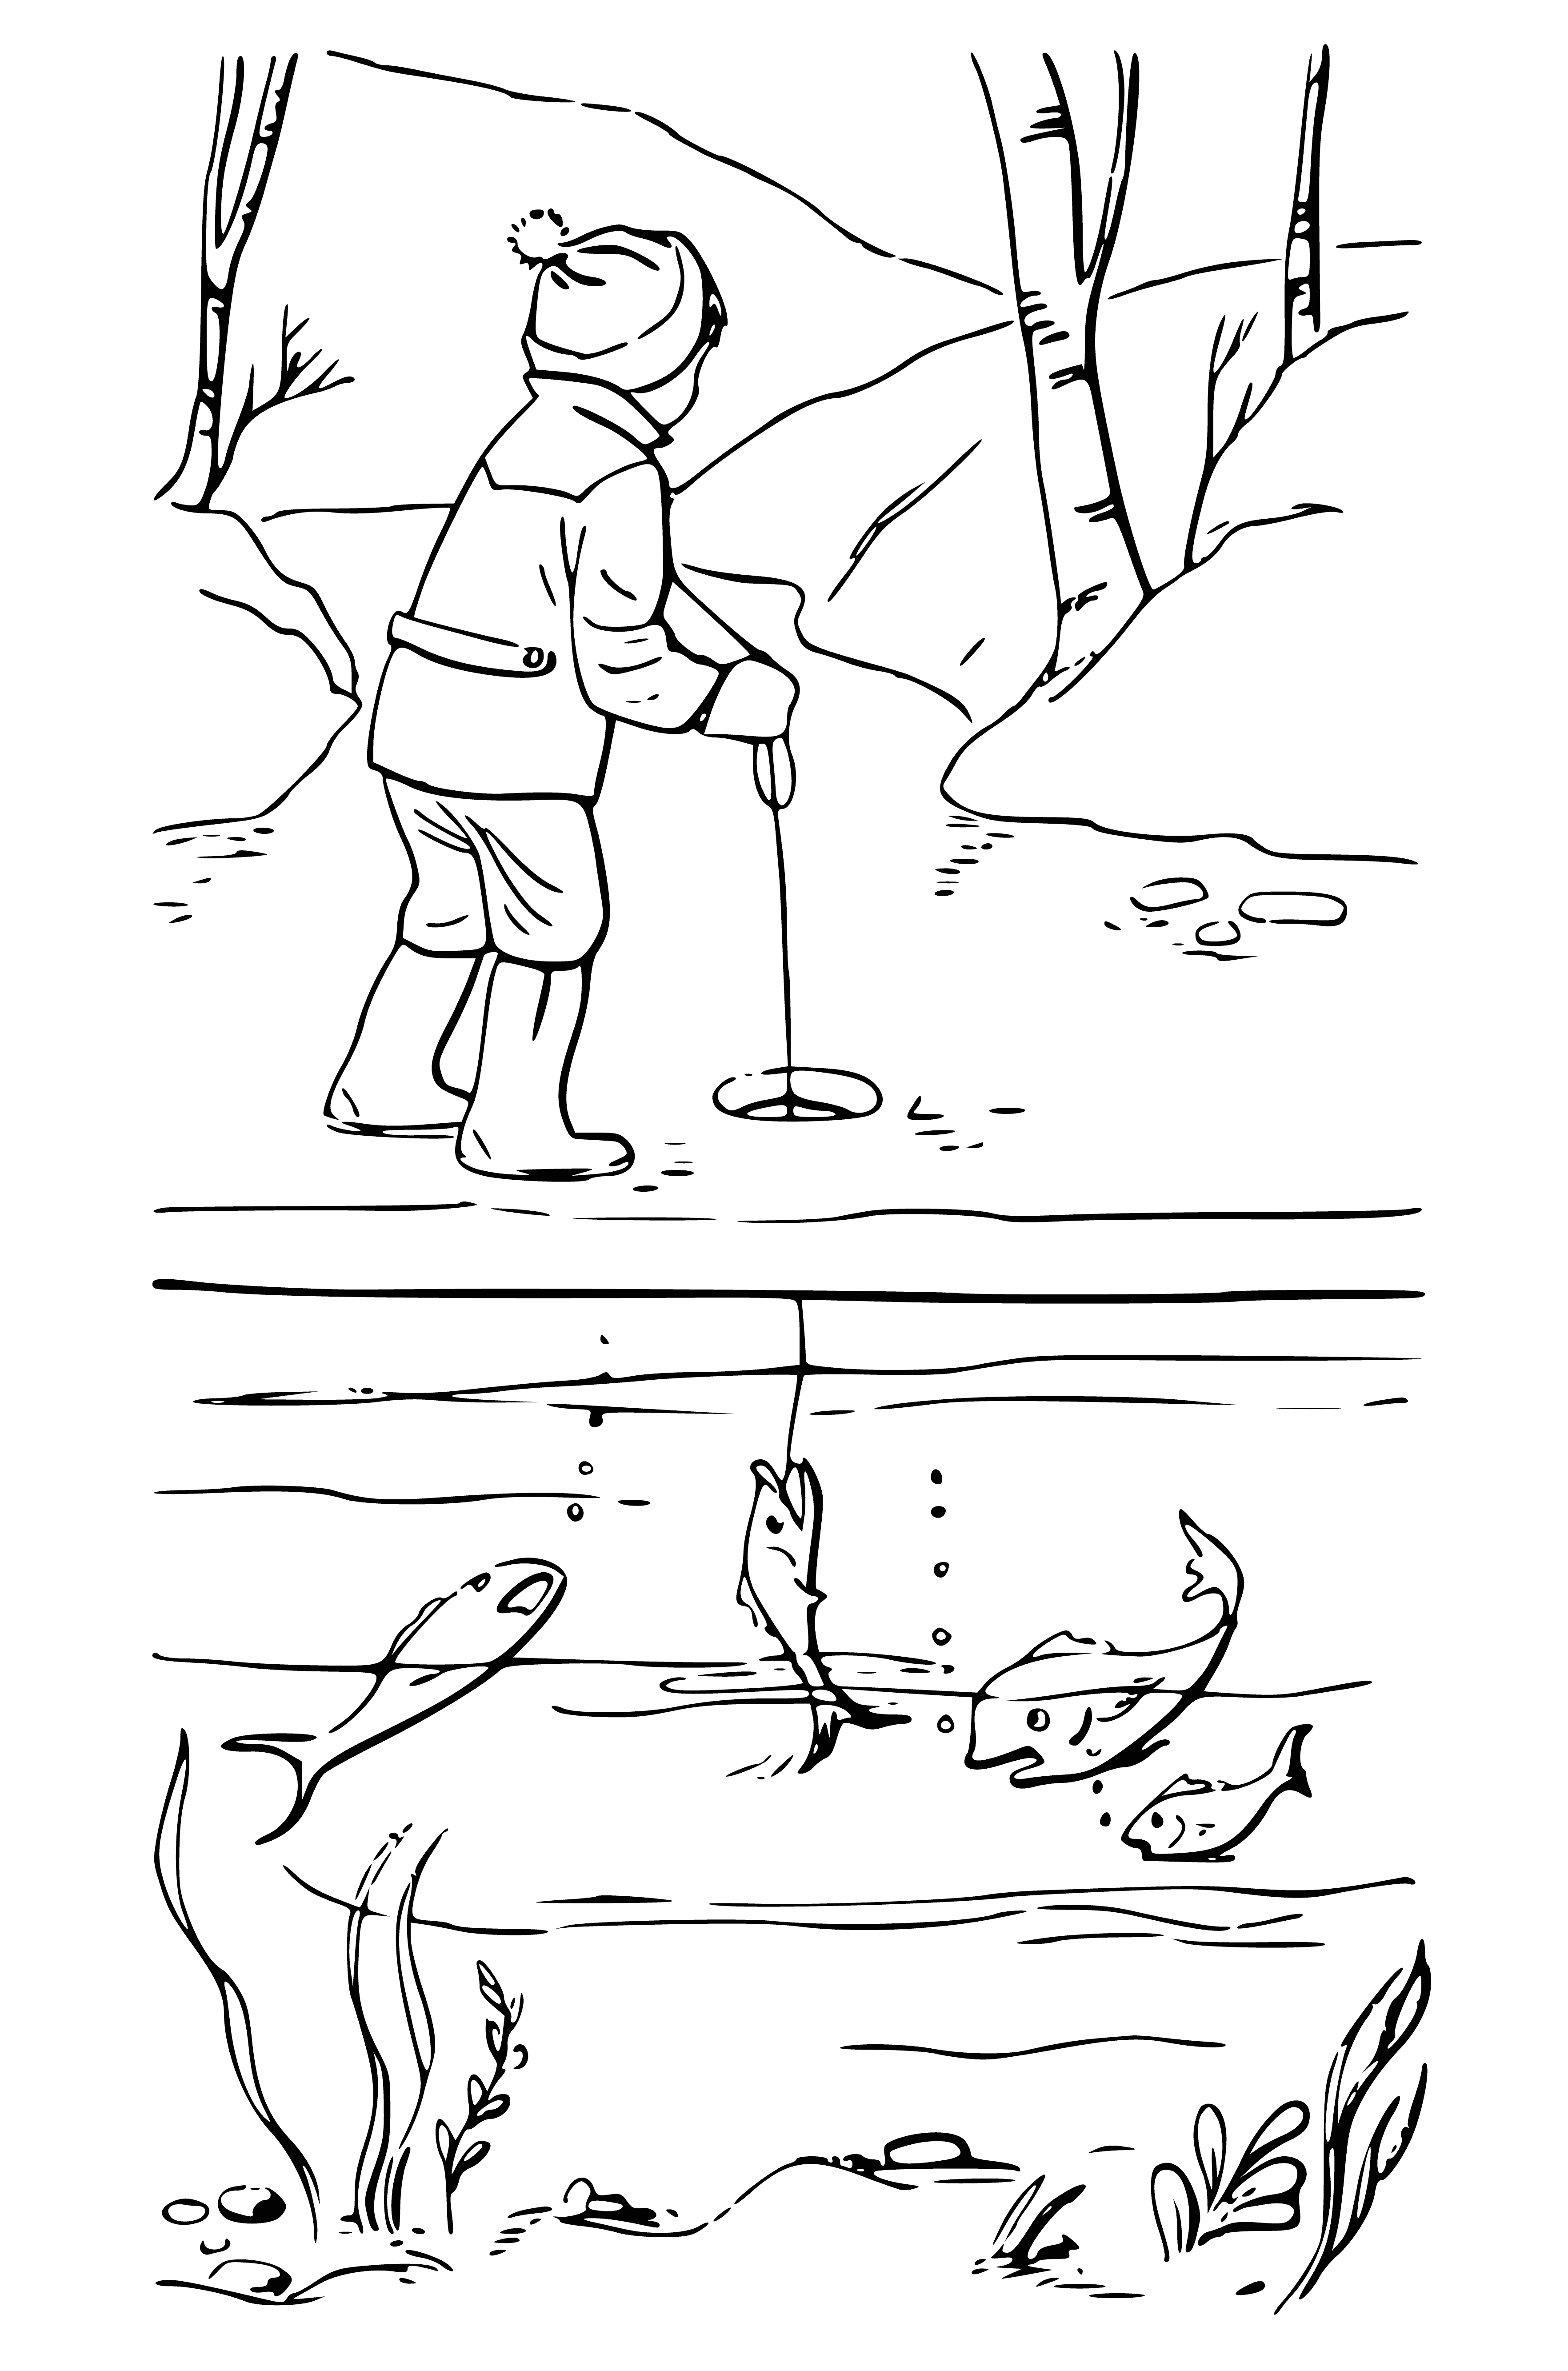 coloring page: Person stands on dock, fishing rod in hand, deep blue water below and snow on the ground. Wears a blue hat and red scarf.